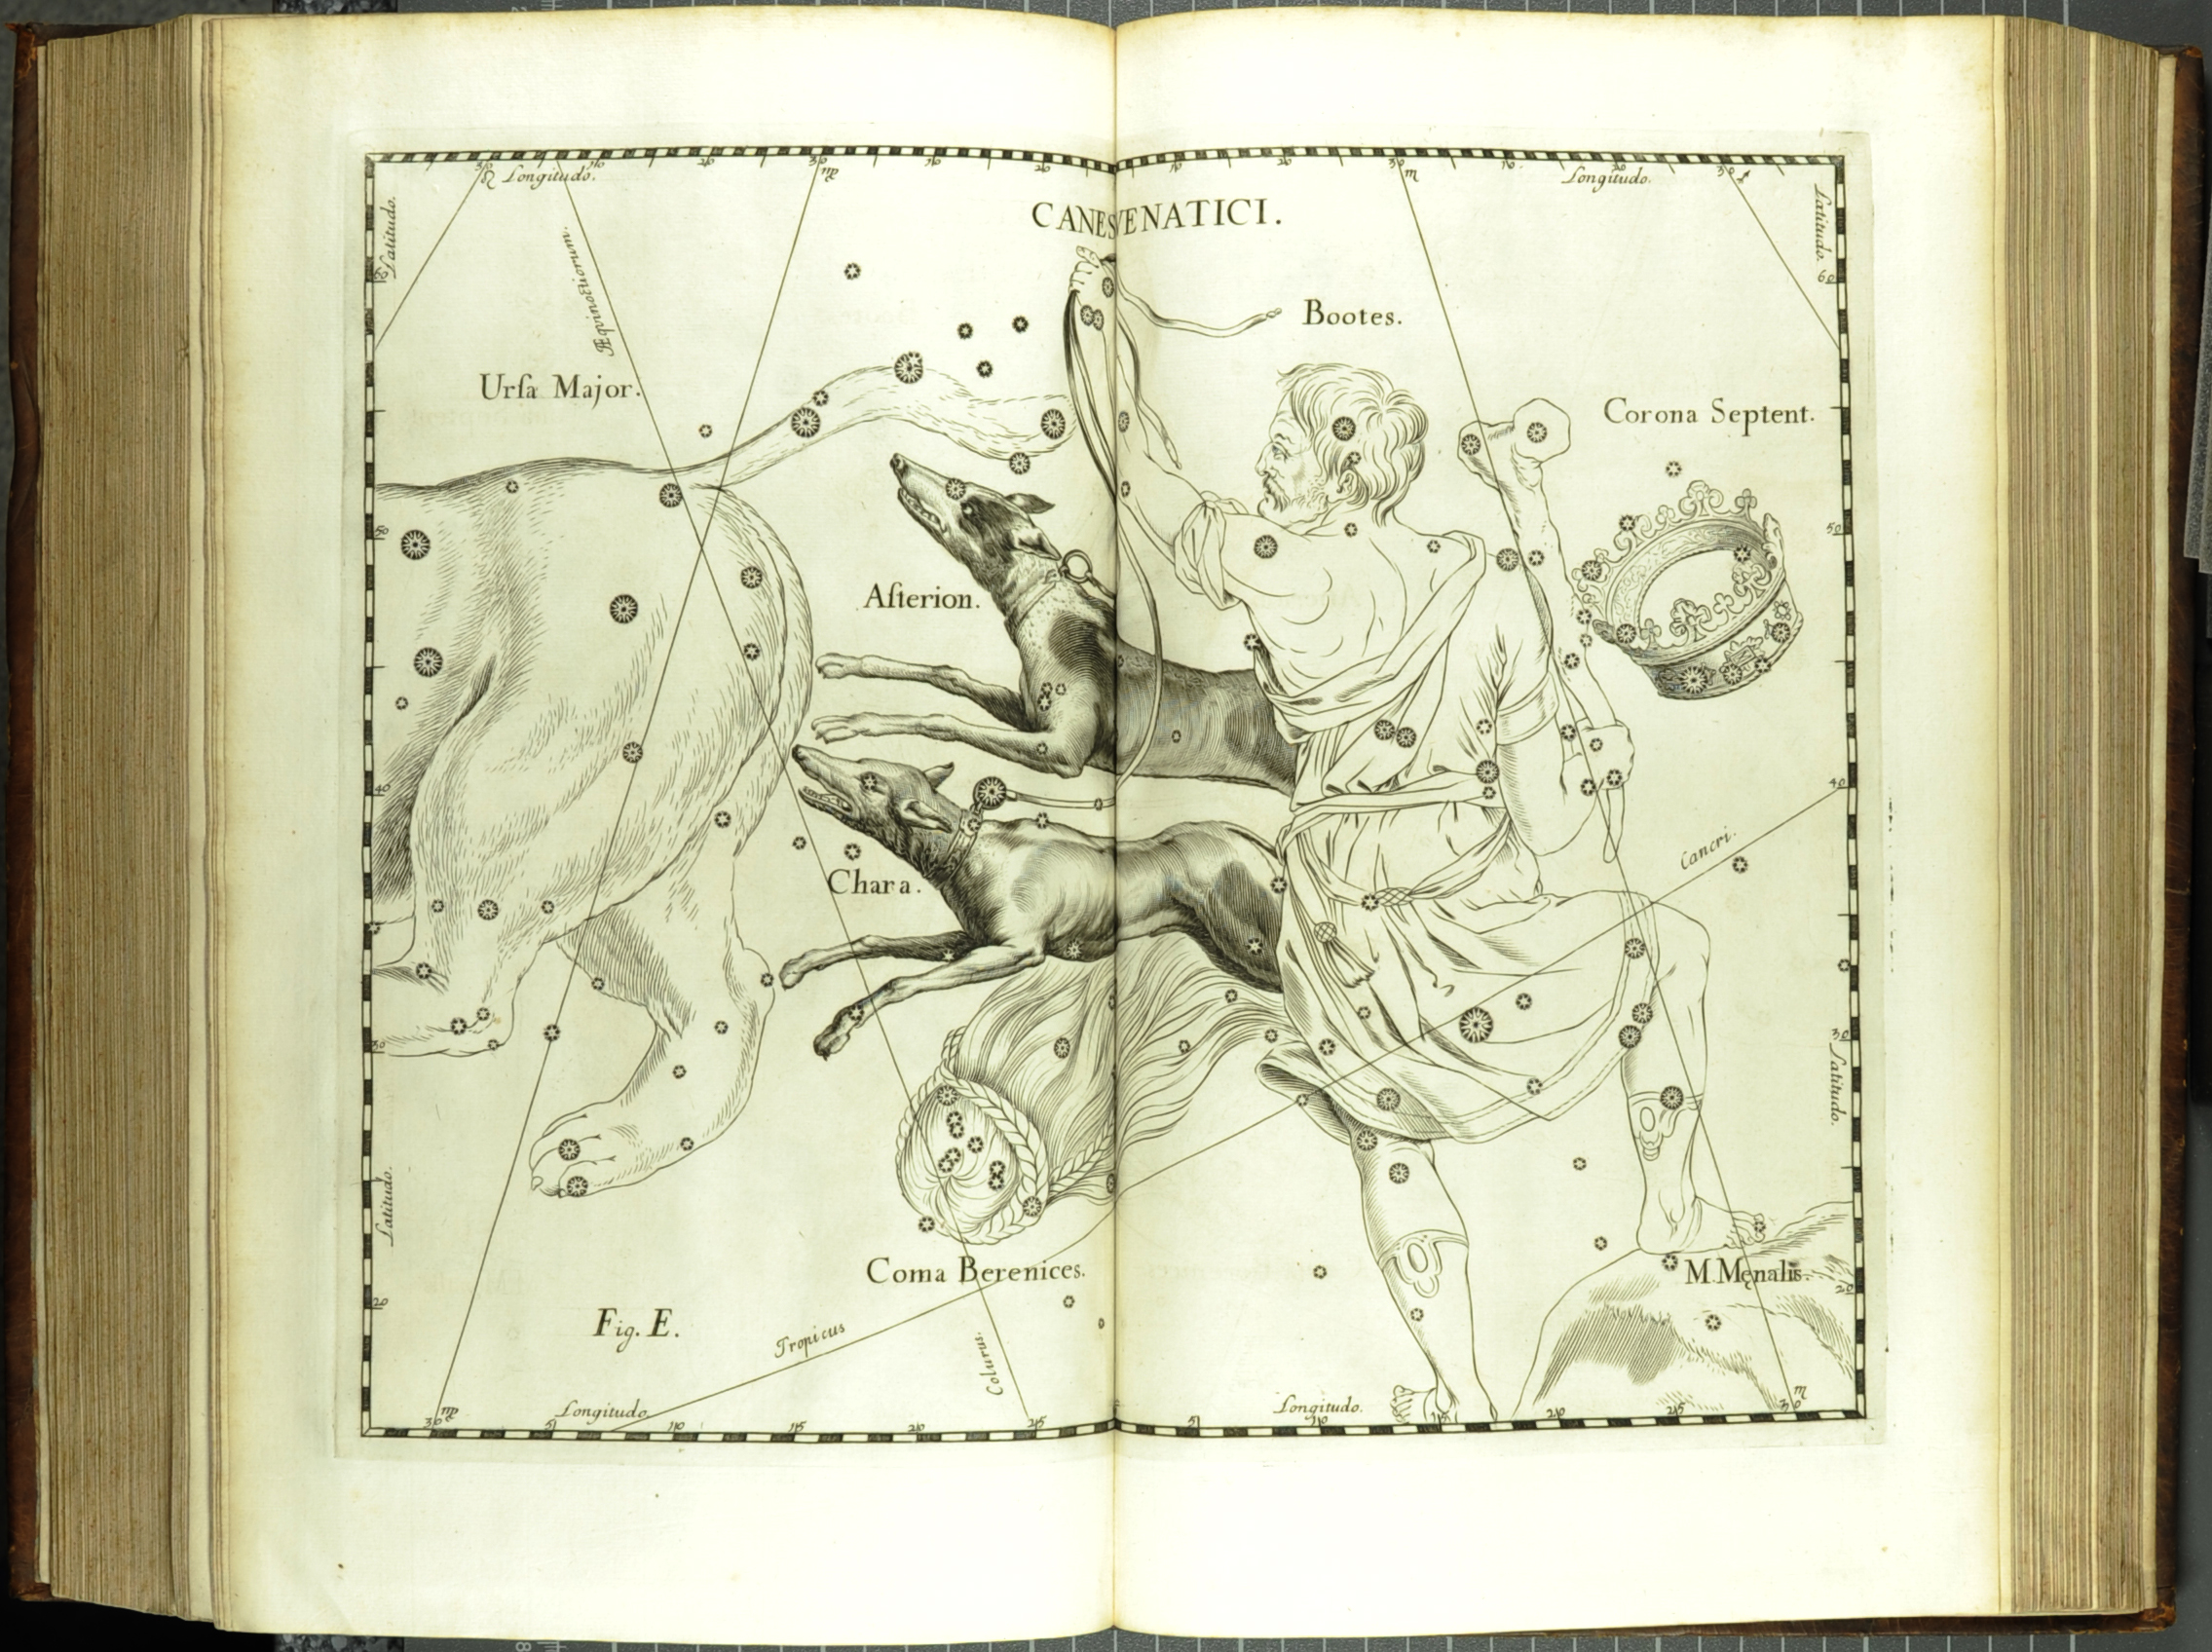 The constellation Canes Venatici, one of the seven new constellations identified by Hevelius in his Firmamentum Sobiescianum (St Andrews copy at r17f QB41.H2).